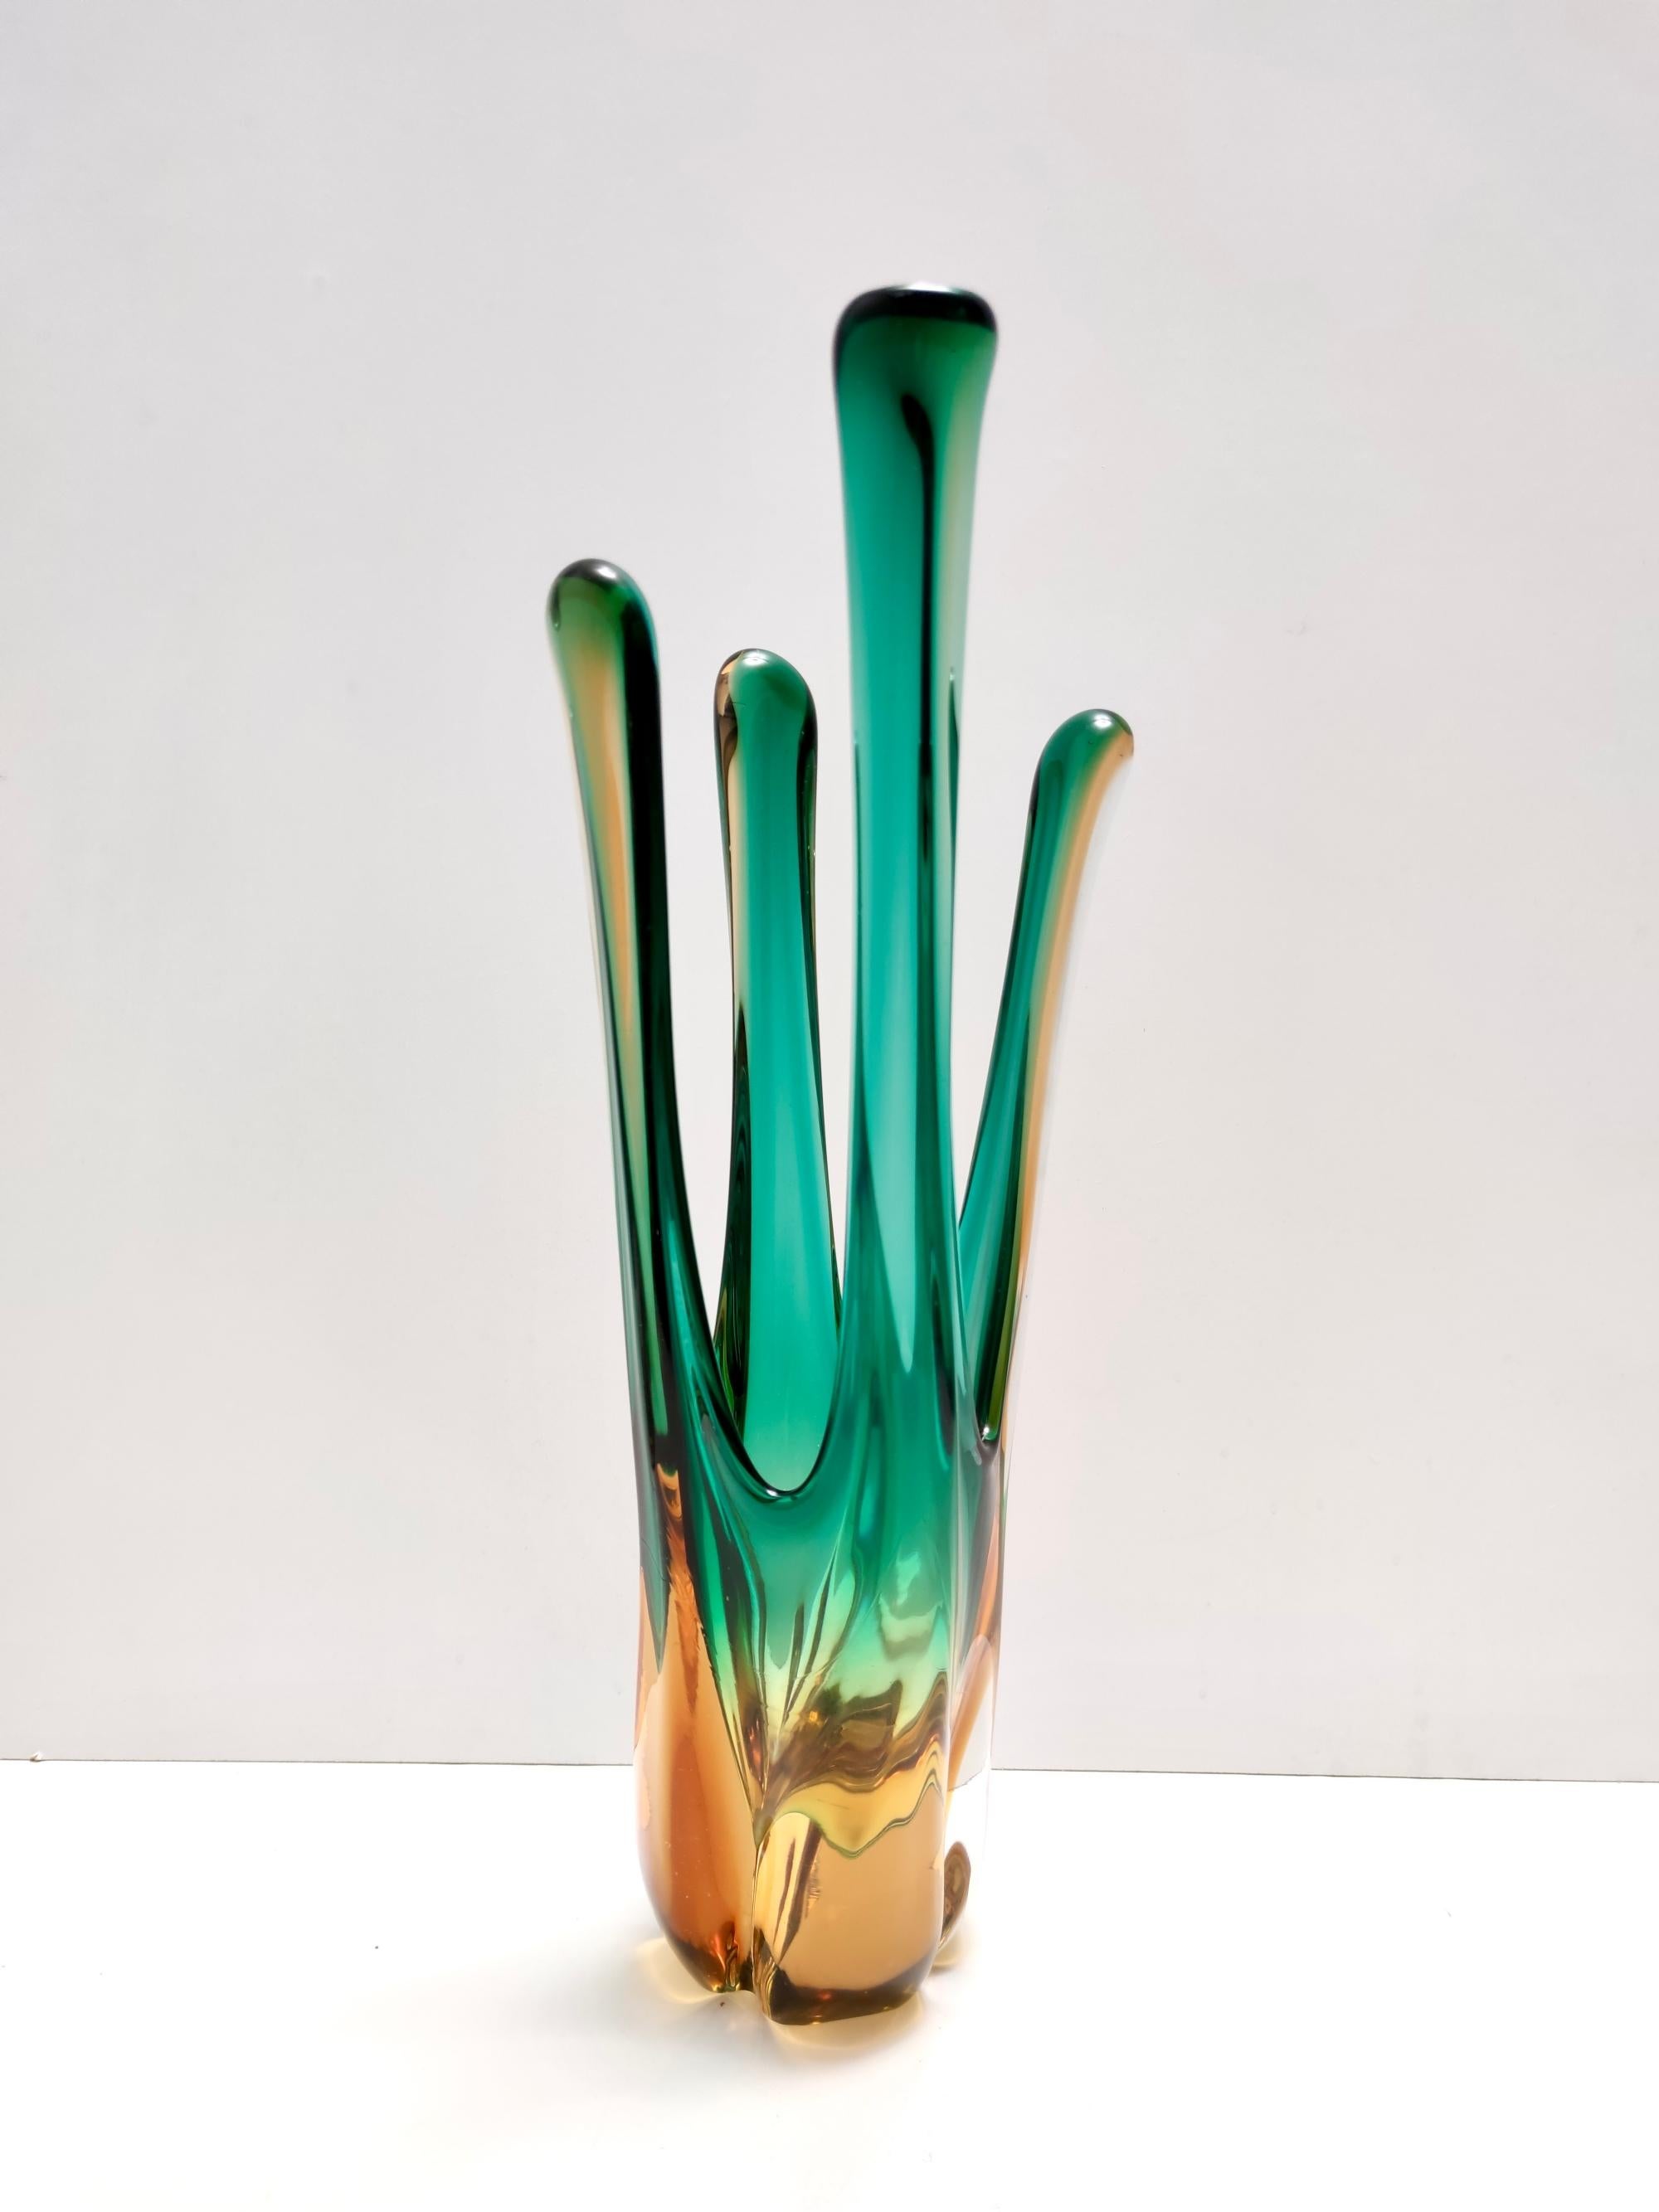 Stunning Vintage Green and Amber Murano Glass Centrepiece Vase, Italy In Excellent Condition For Sale In Bresso, Lombardy